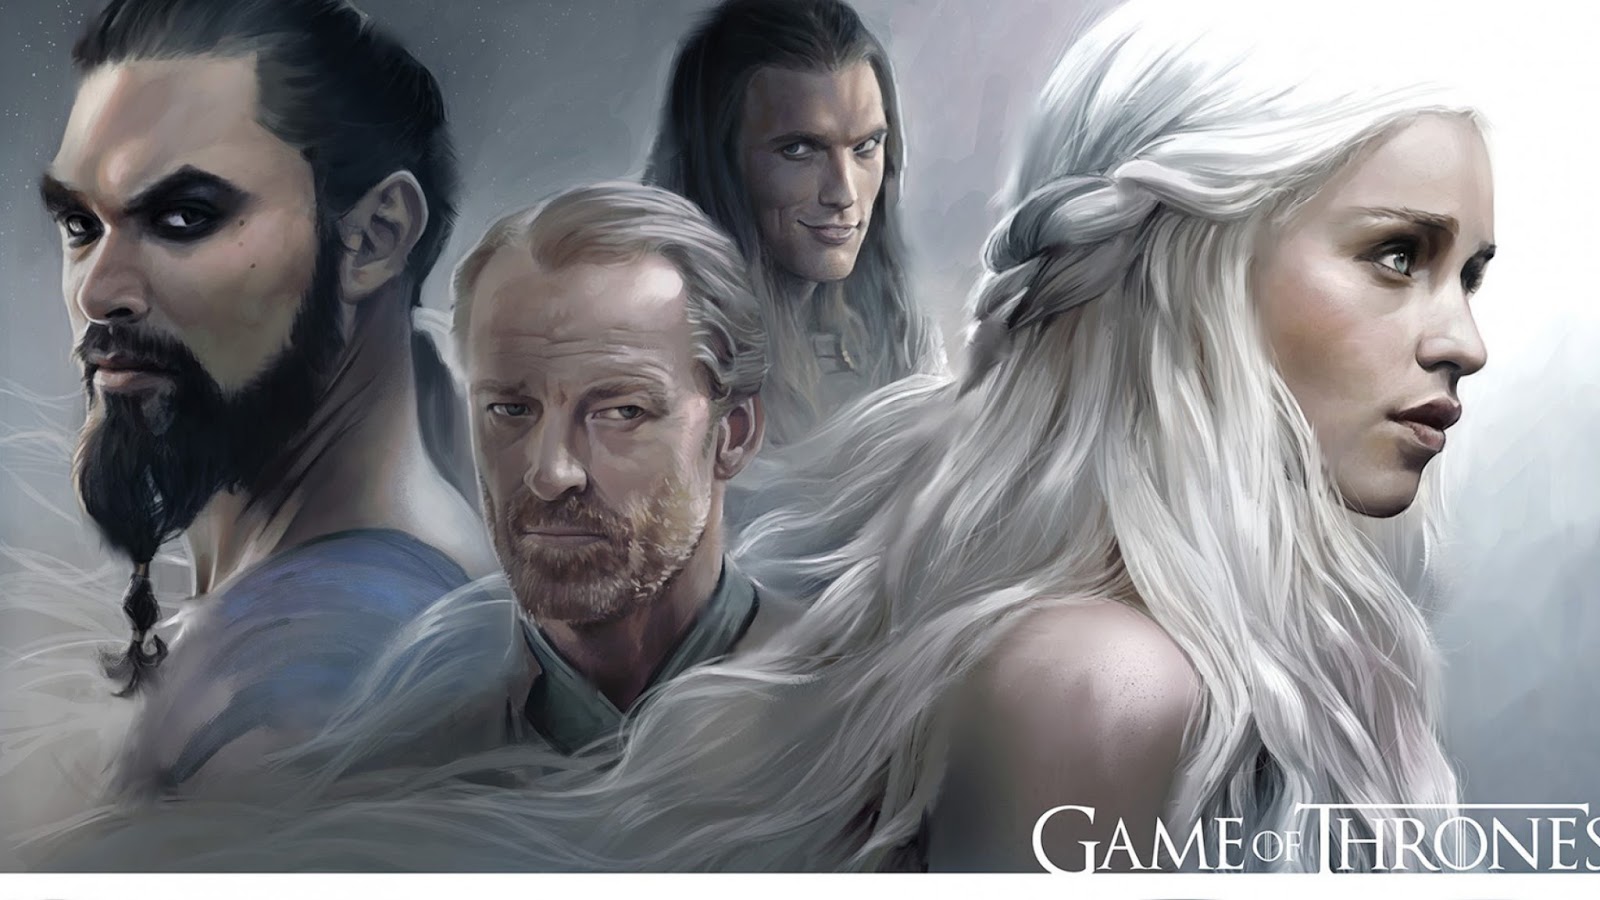 70 Hd Game Of Thrones Wallpapers Season 1 To 8 2019